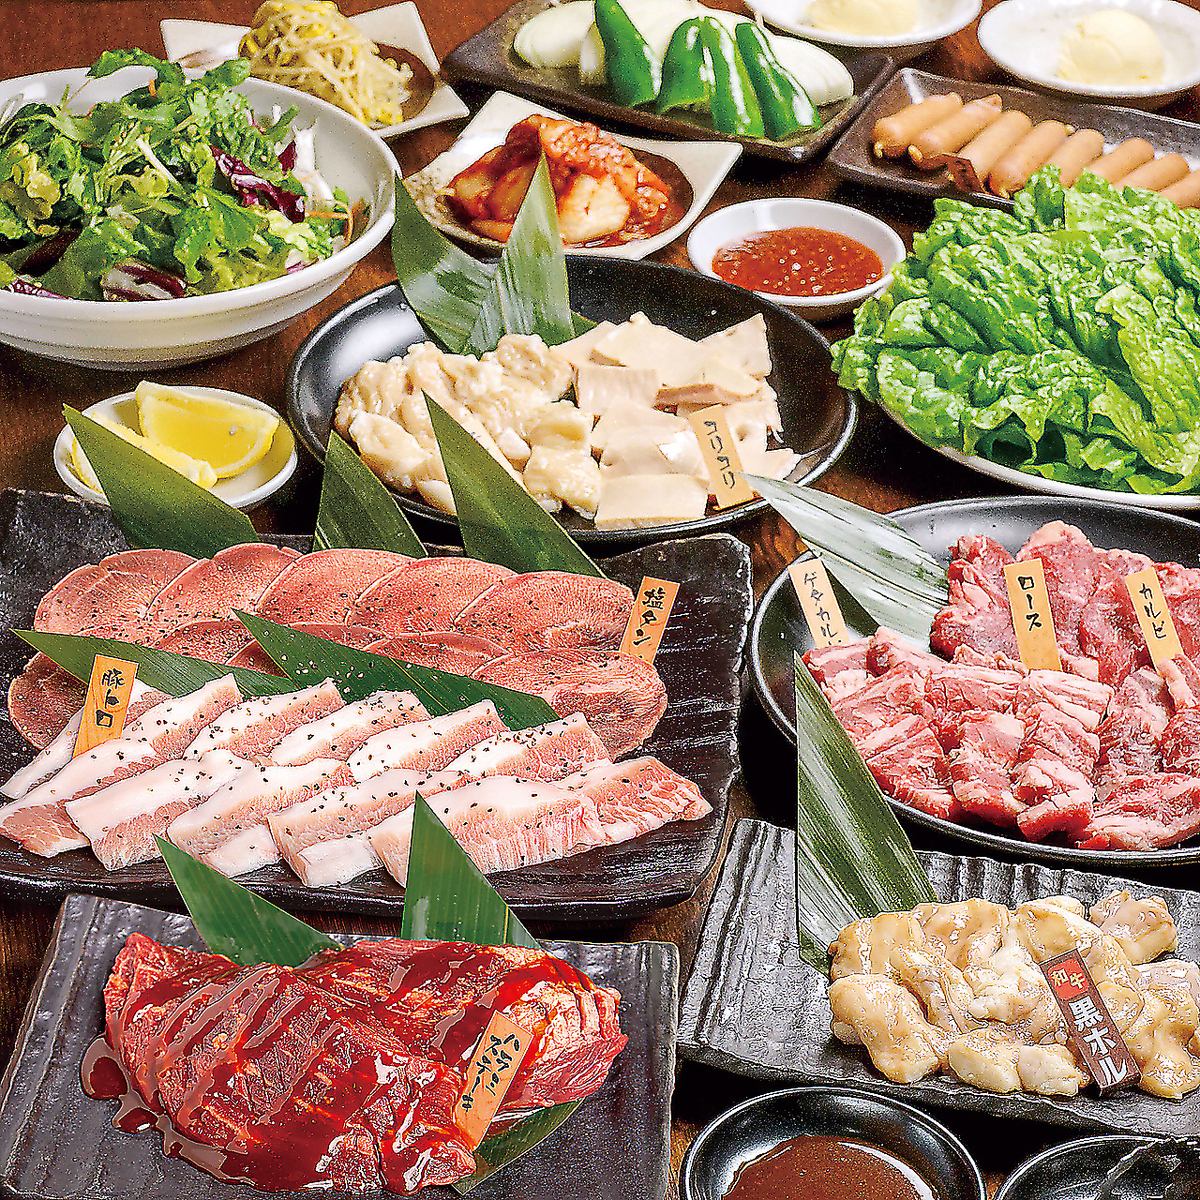 [Many all-you-can-drink courses include draft beer!] Motsu nabe is also recommended as a yakiniku course for parties.